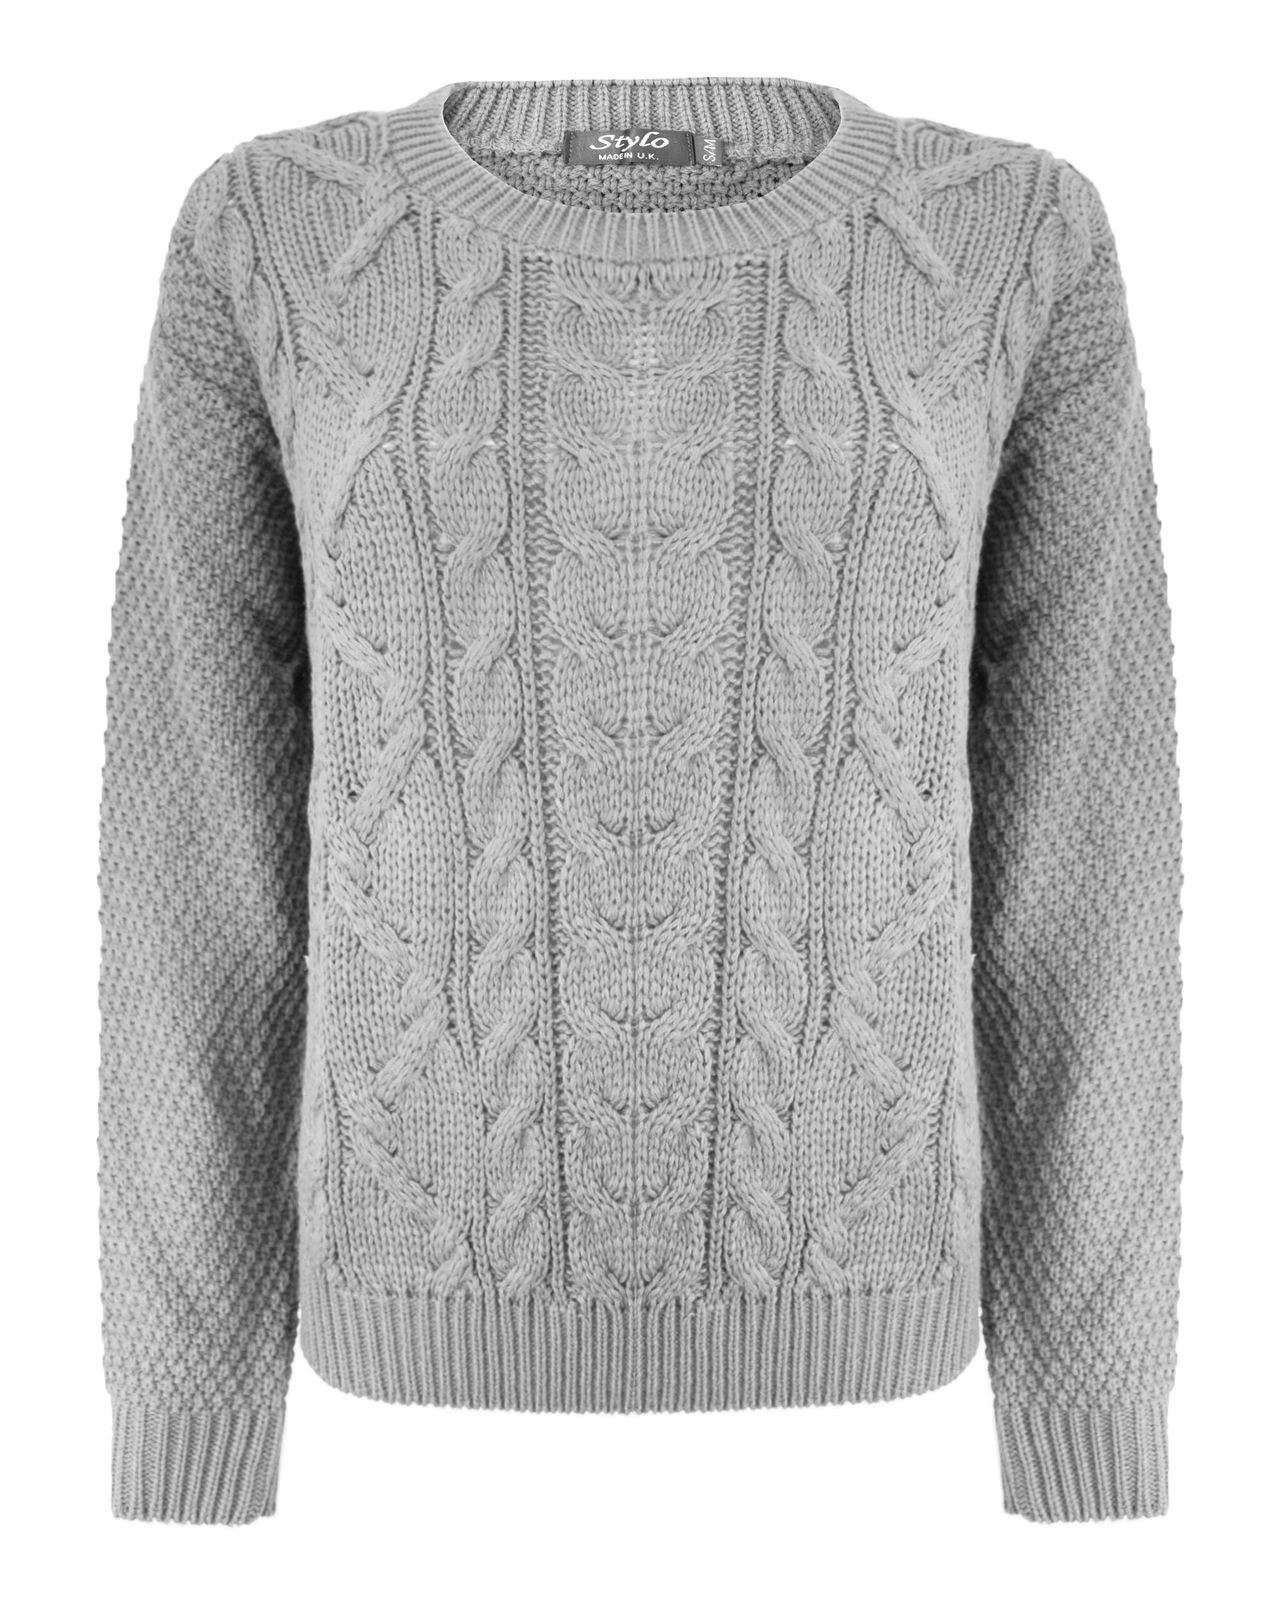 cable knit jumper ladies-women-knitted-long-sleeve-cable-knit-jumper- bfdiggn